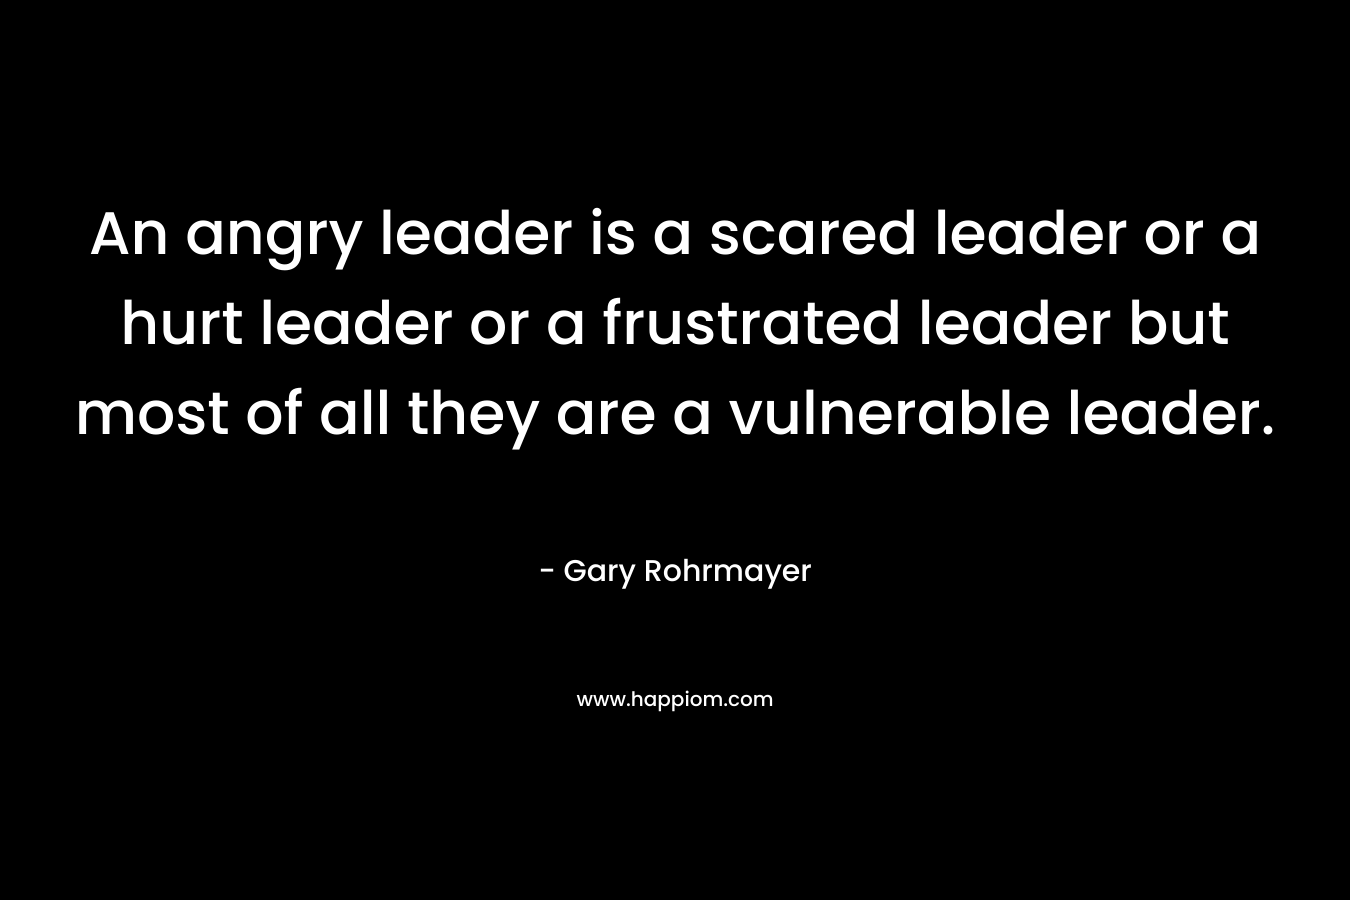 An angry leader is a scared leader or a hurt leader or a frustrated leader but most of all they are a vulnerable leader. – Gary Rohrmayer